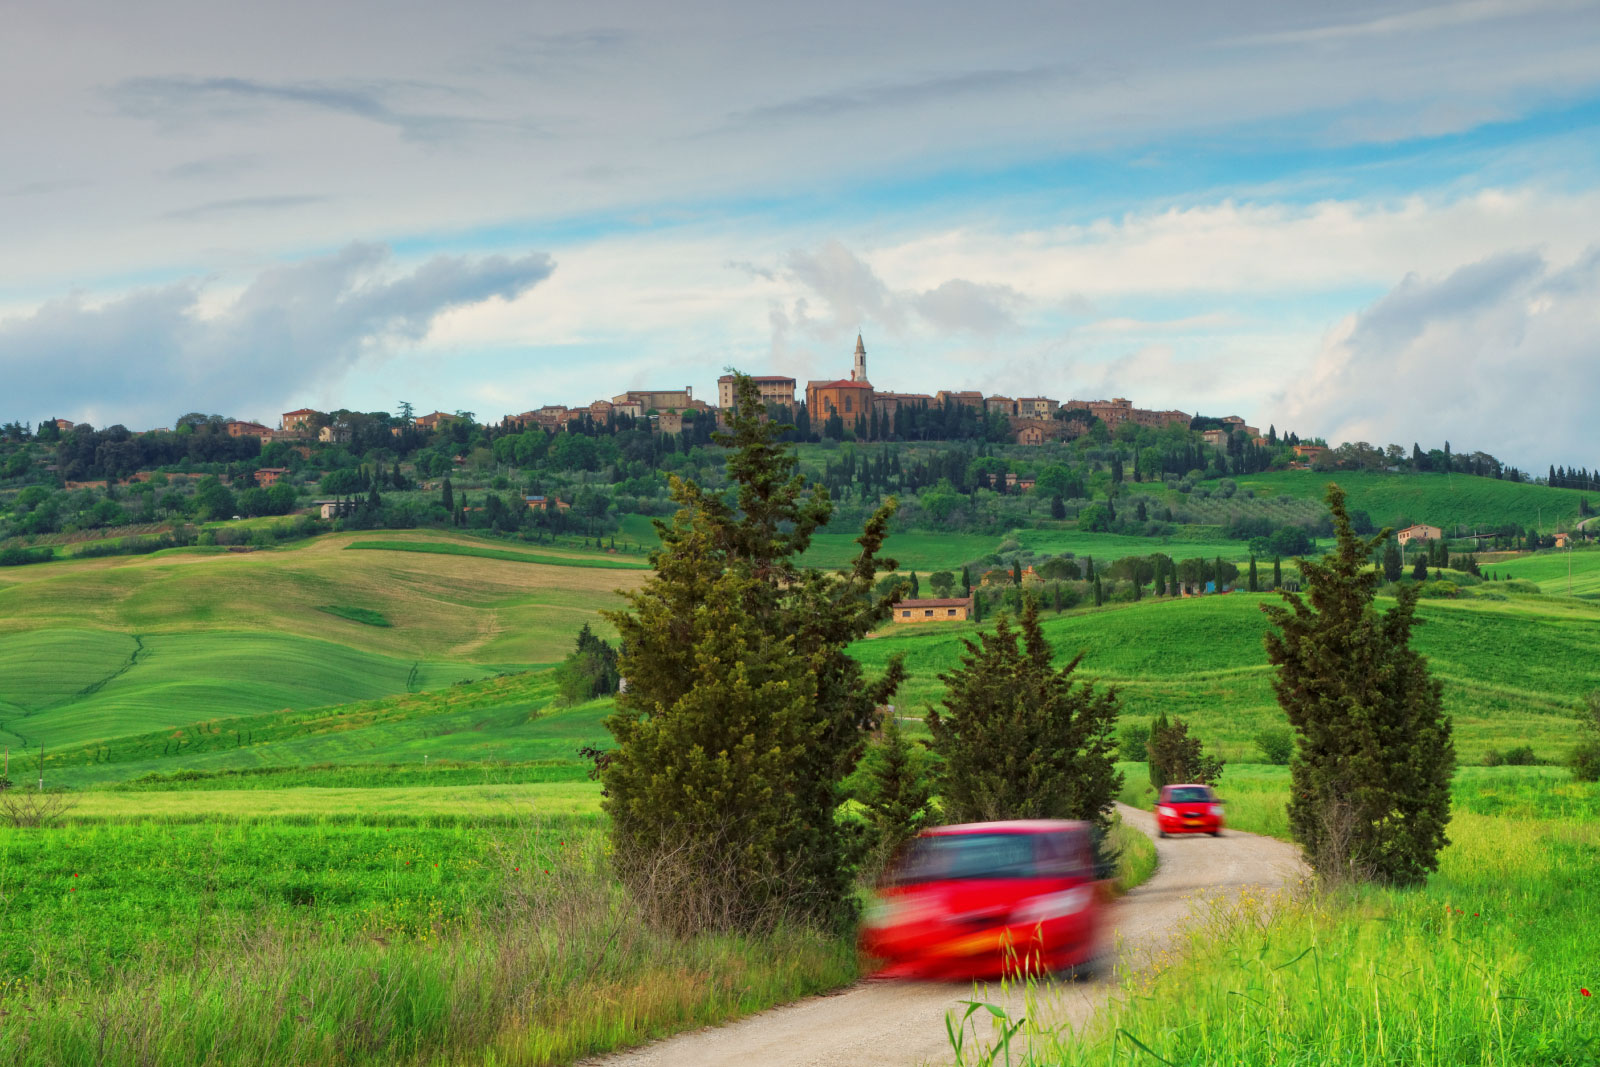 Motion blurred cars on a dirt road in Tuscany